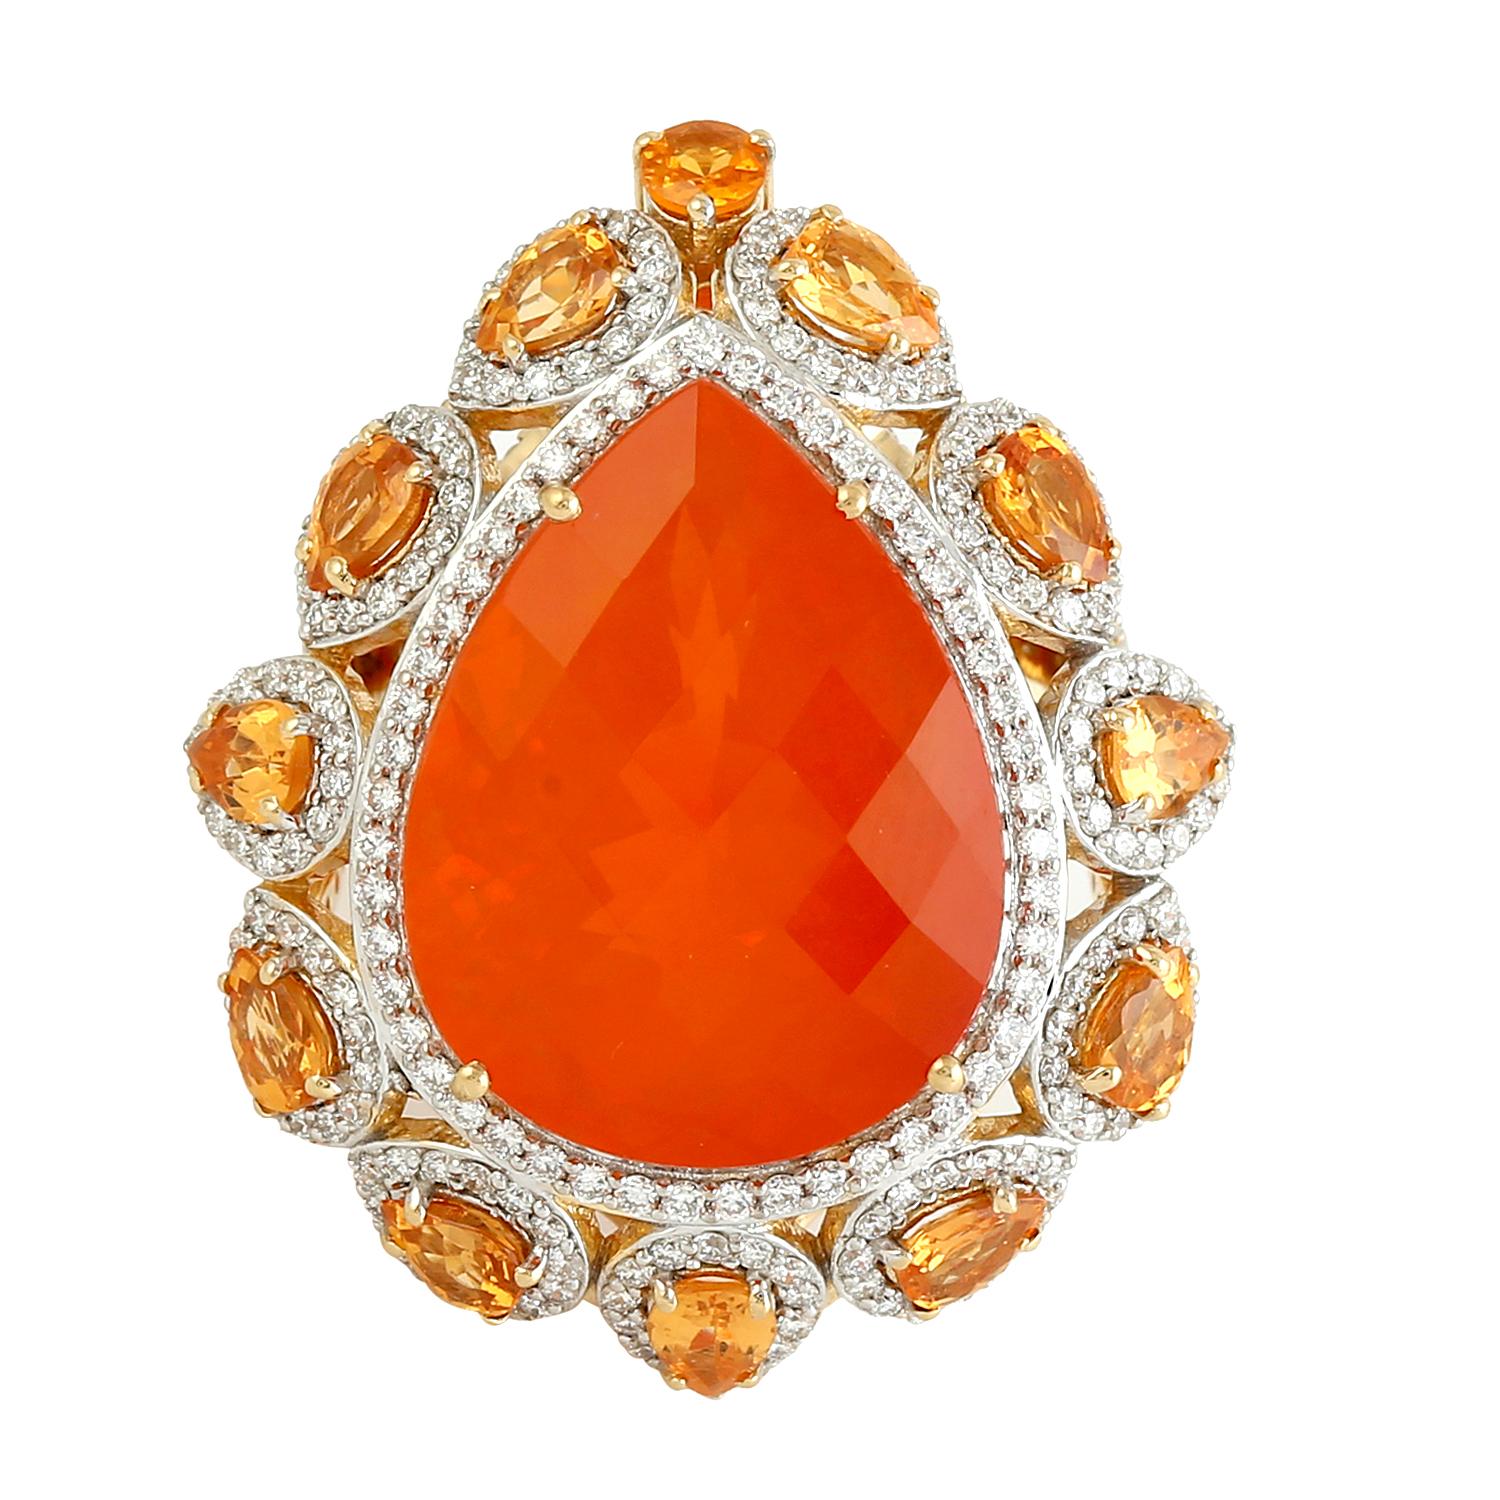 Pear Shaped Fire Opal Cocktail Ring With Garnet & Diamonds In 18k Yellow Gold In New Condition For Sale In New York, NY